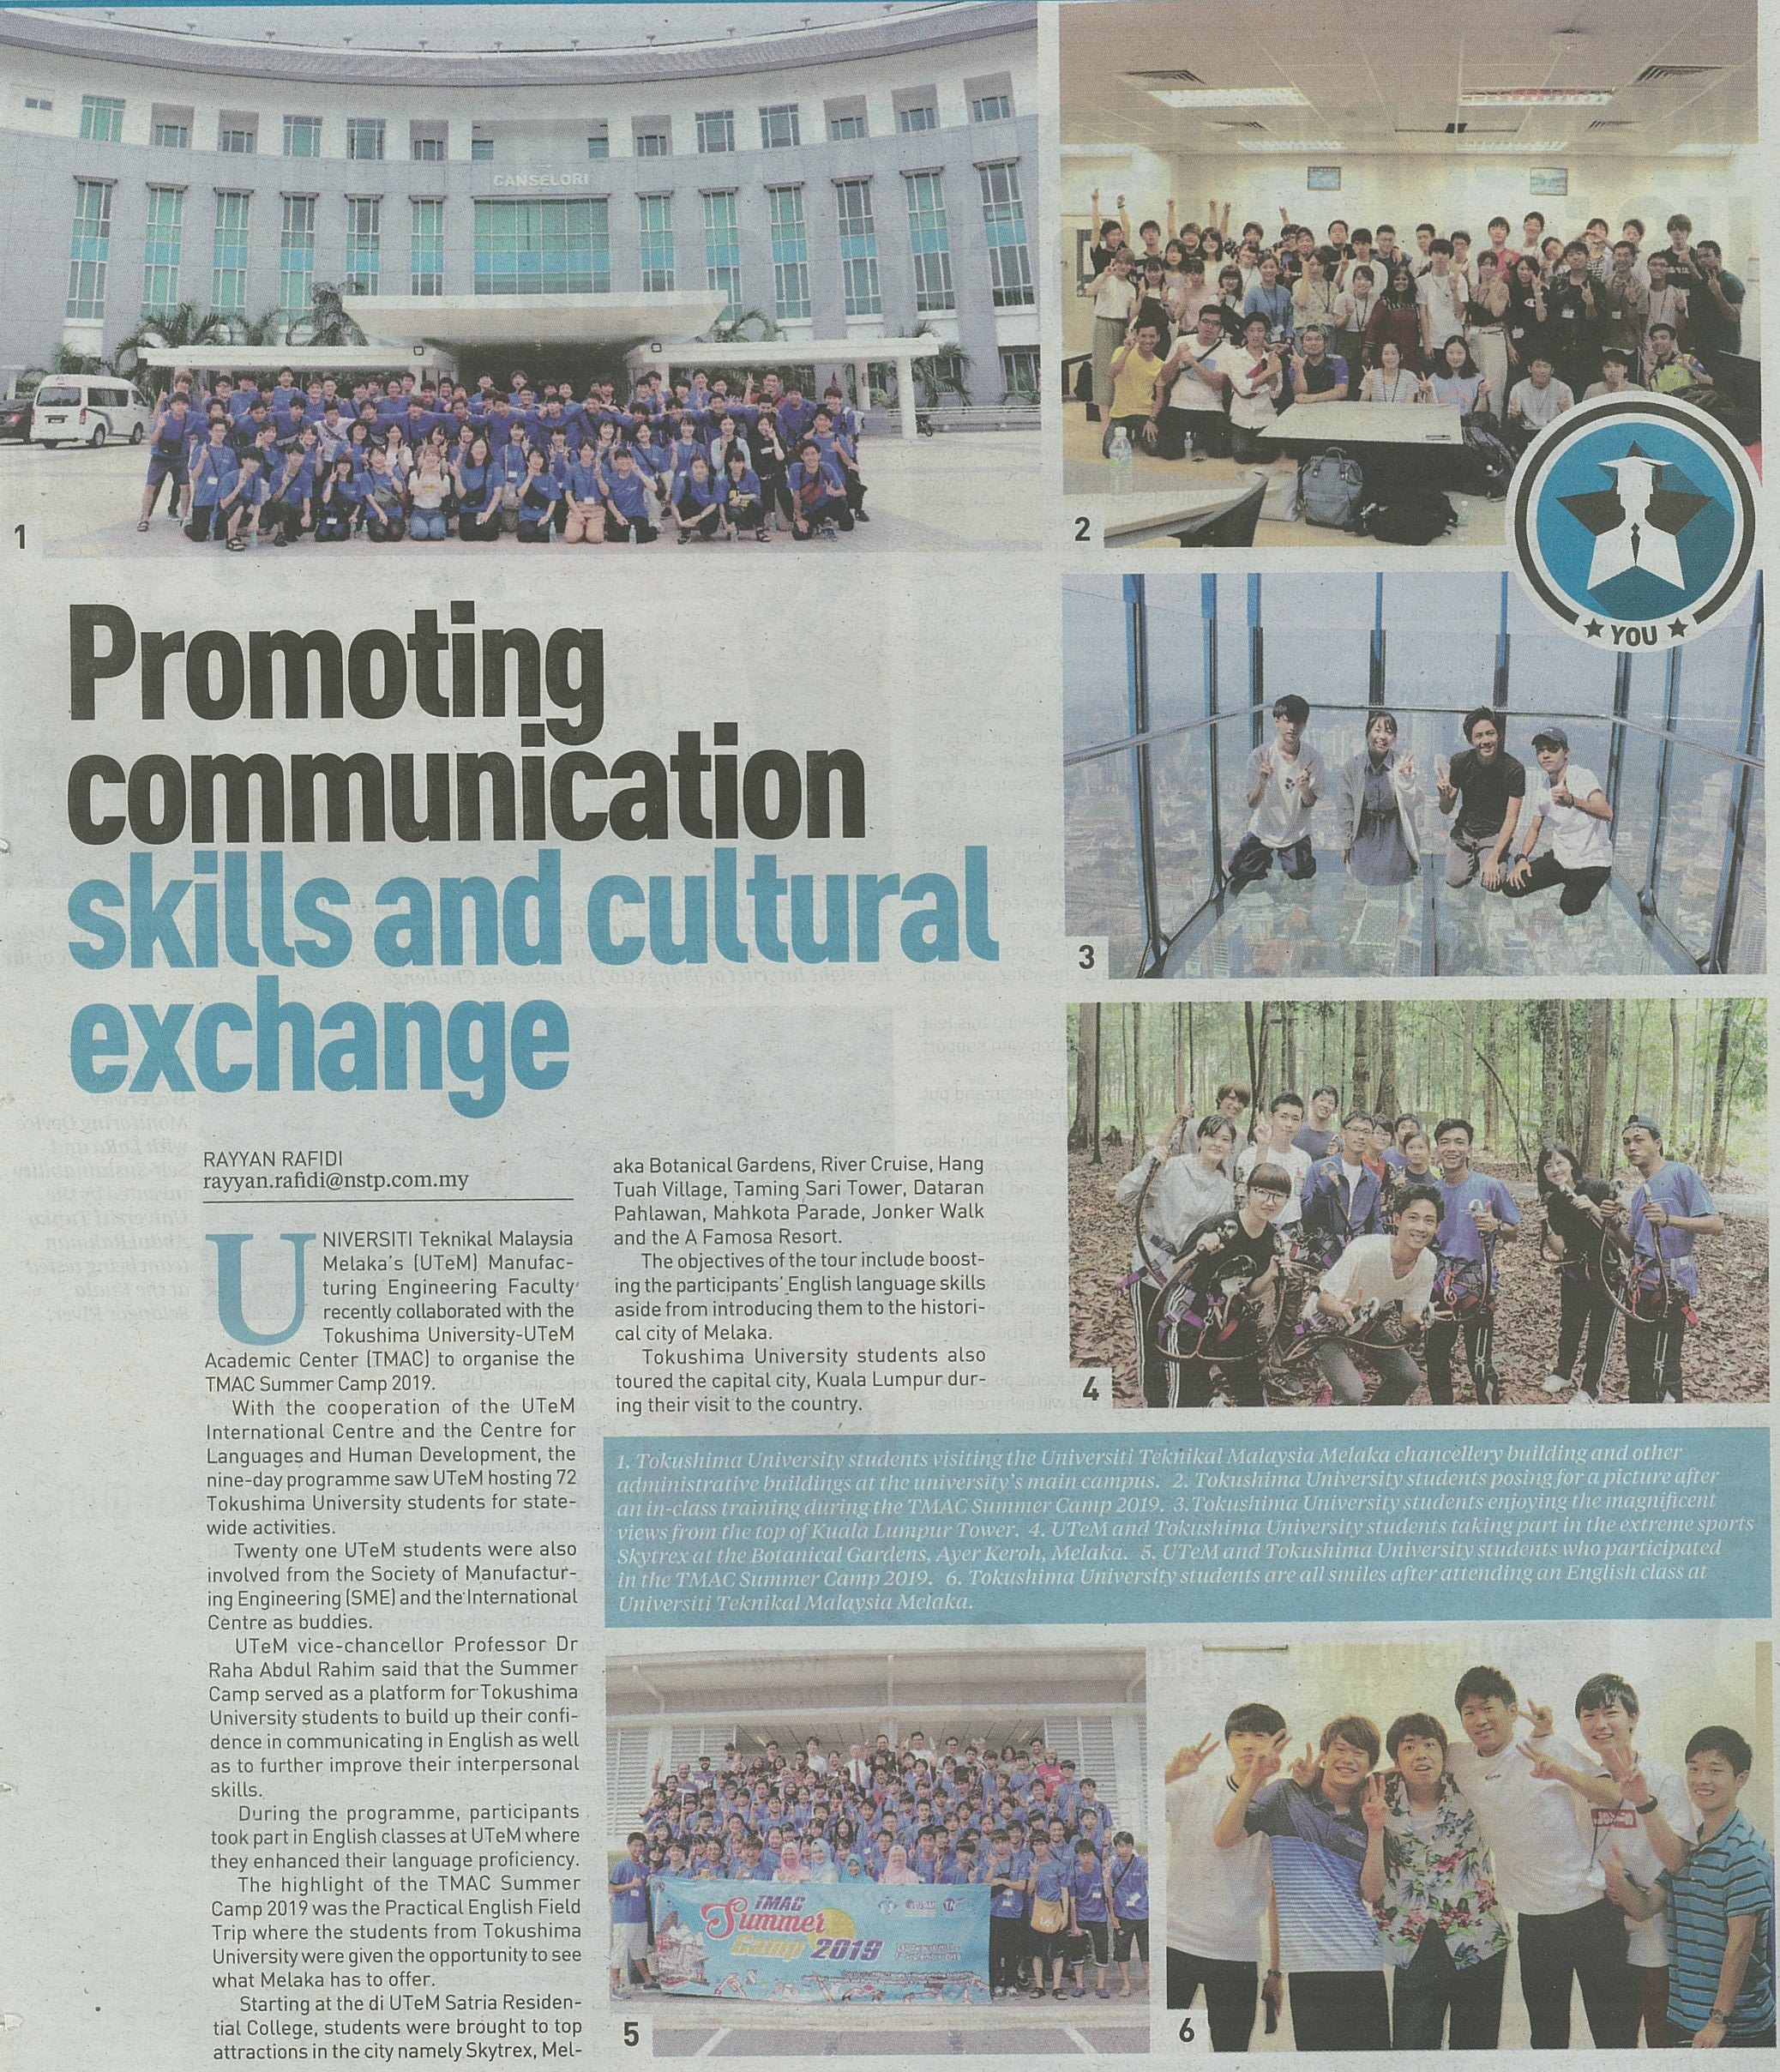 Promoting communication skills and cultural exchange